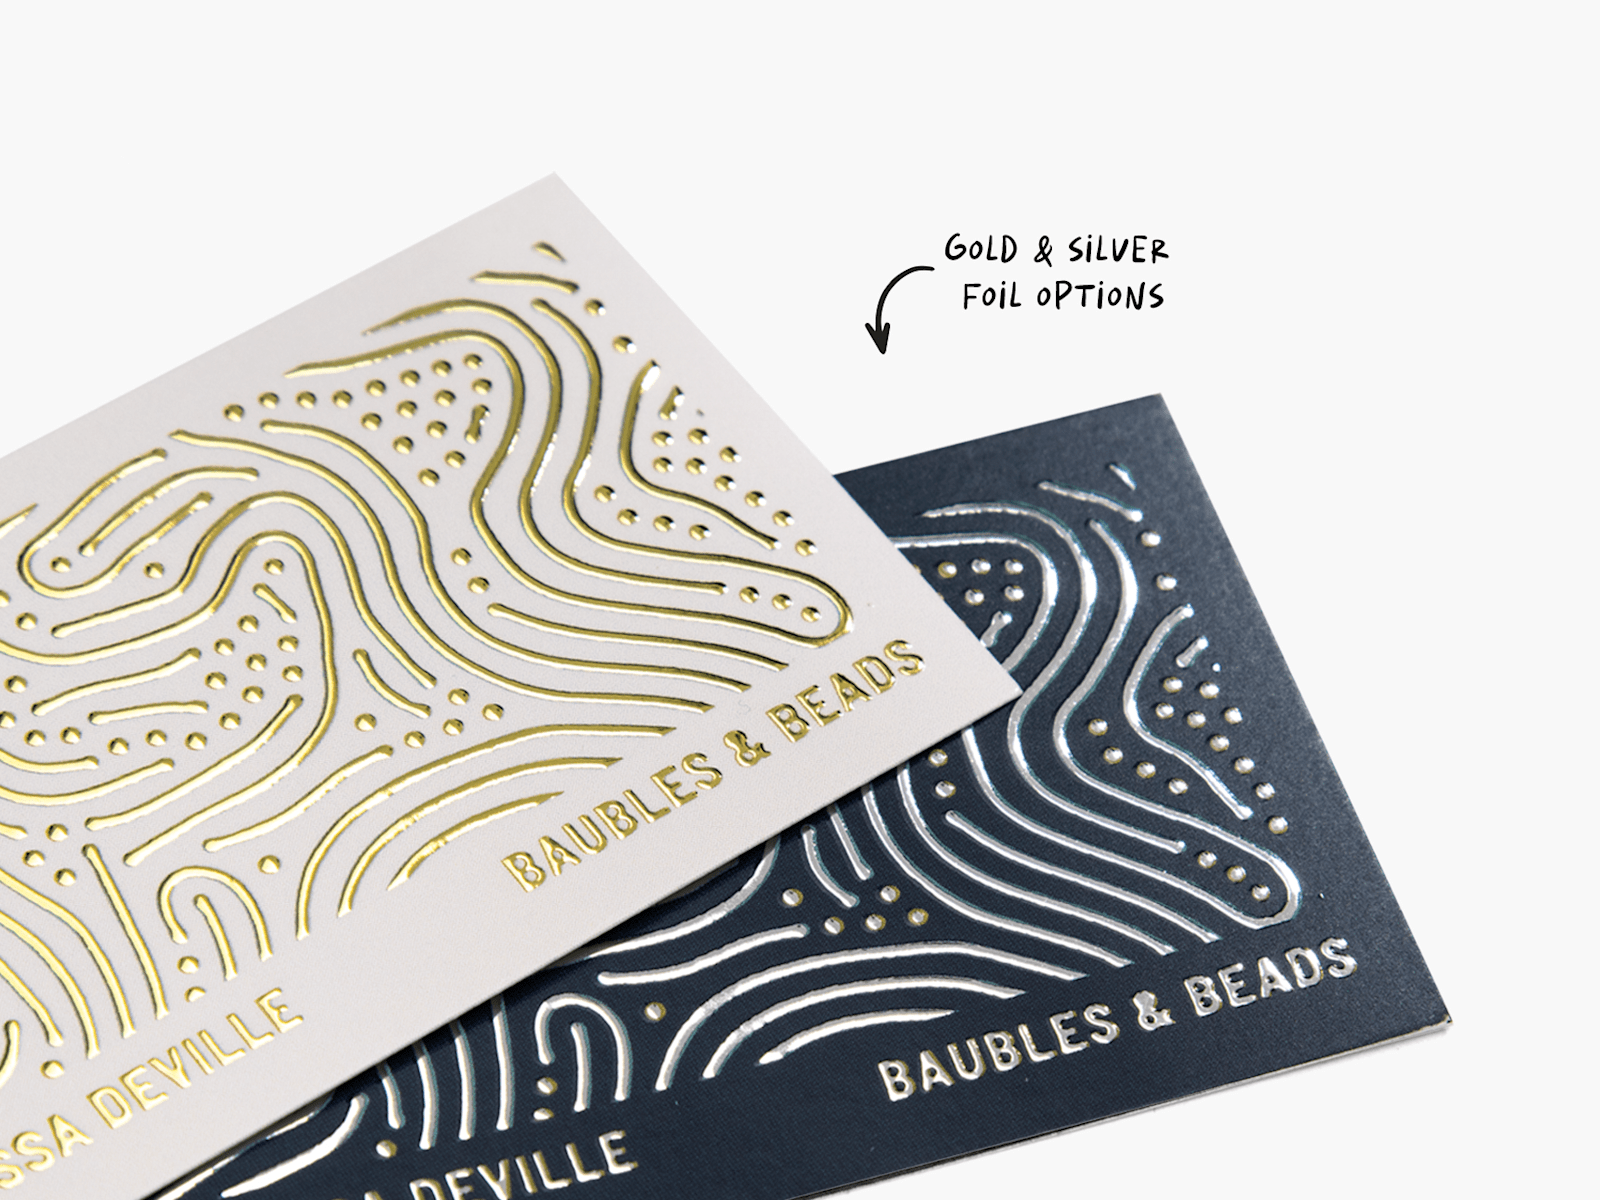 Raised foil business cards promoting a jewelry store, showing the gold and silver foil options.